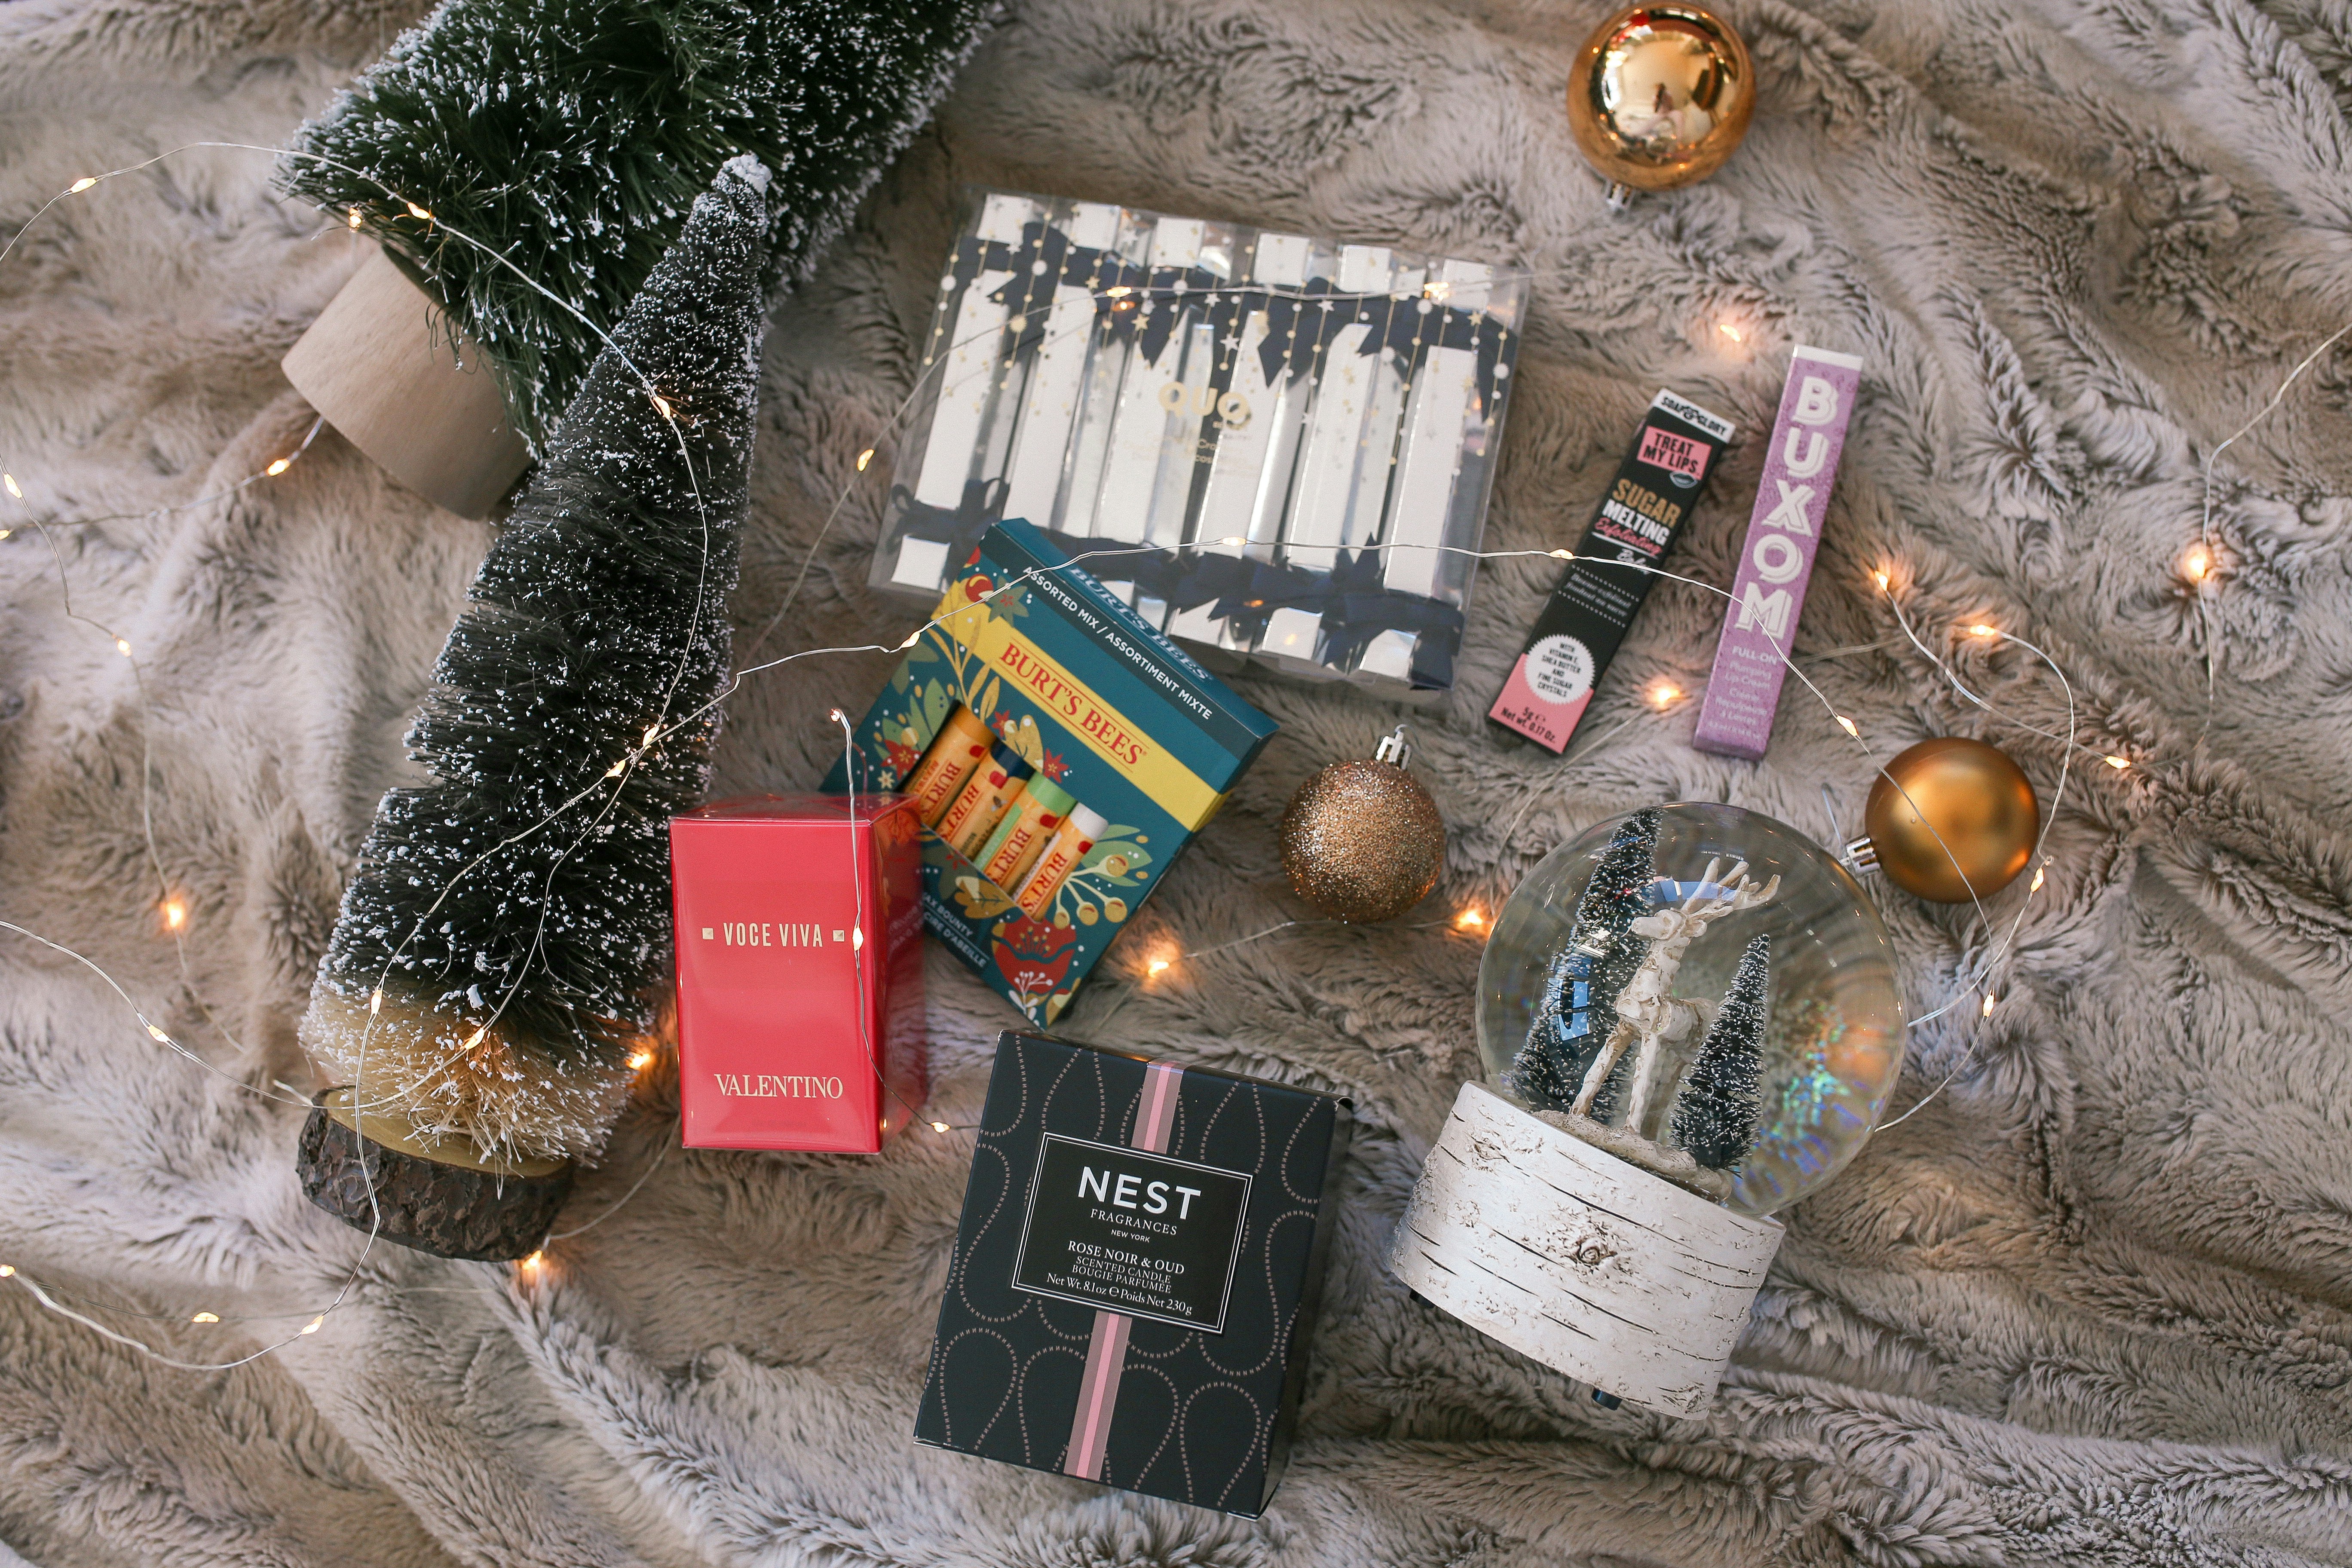 Best Beauty Gift Ideas for Christmas and last-minute gifts from Shoppers Drug Mart